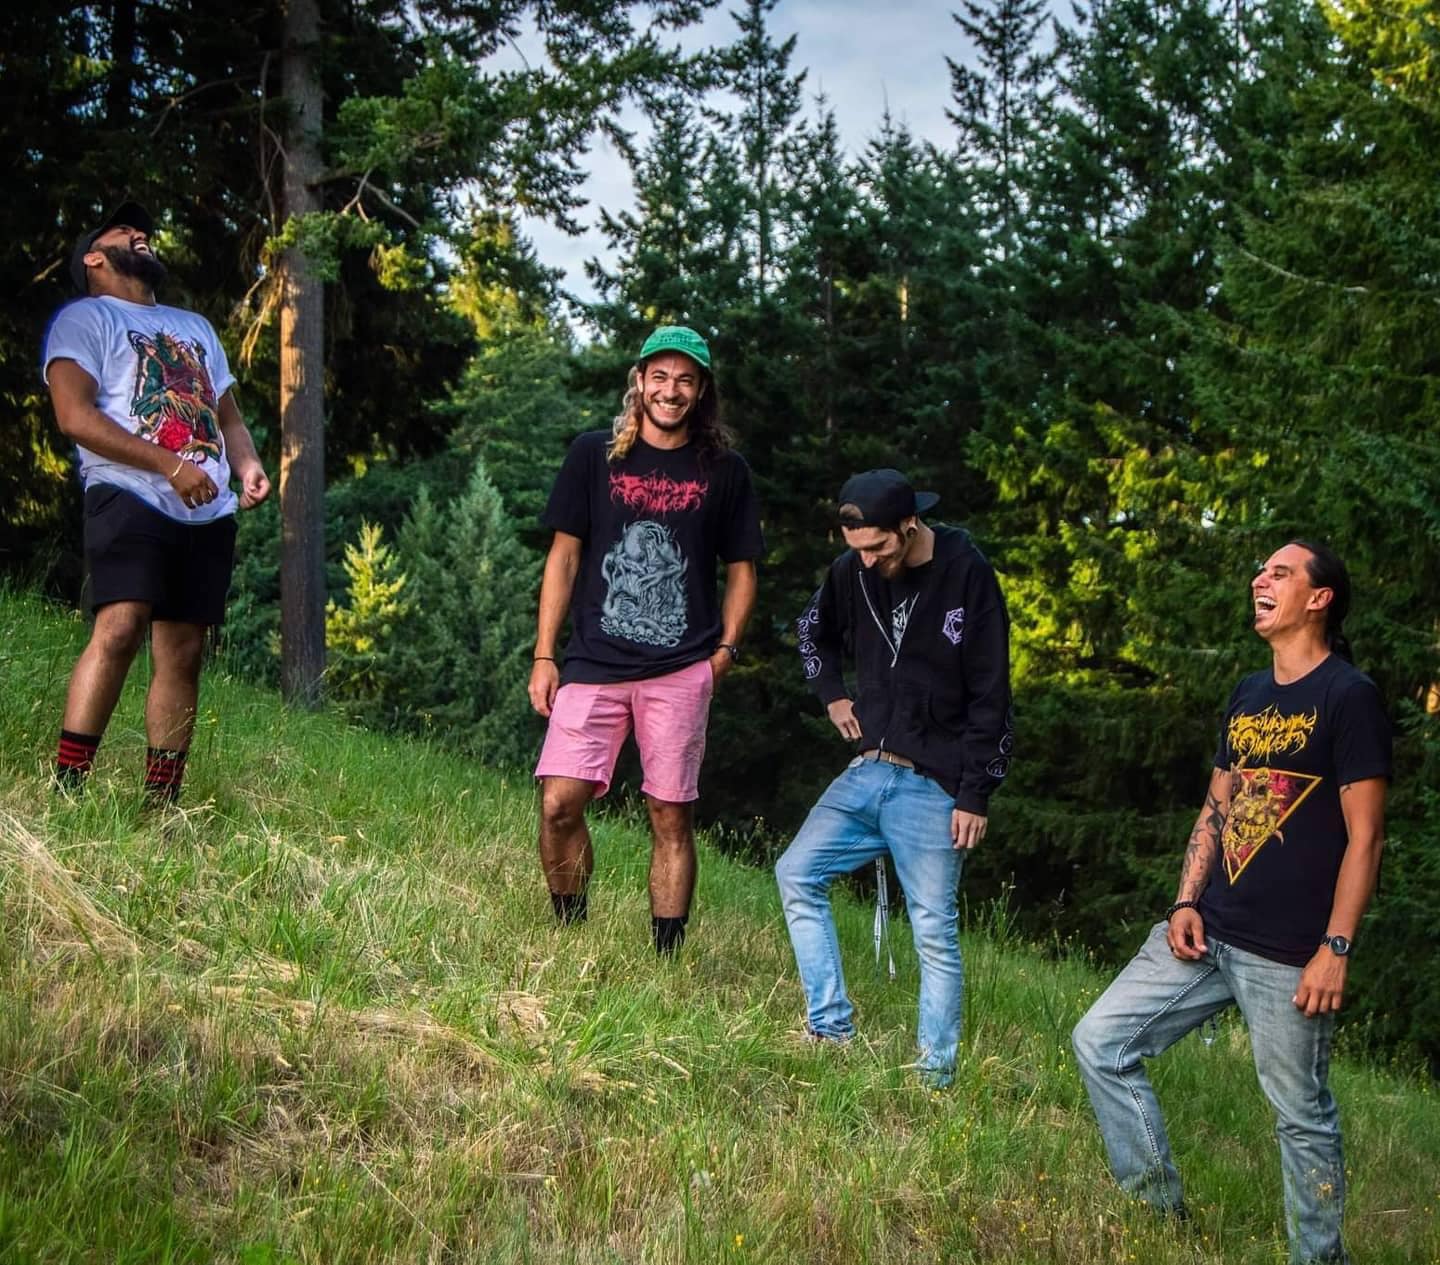 Band members laughing during photoshoot on hill. Left to right: Krishna, Sean, Jake, and Ben.